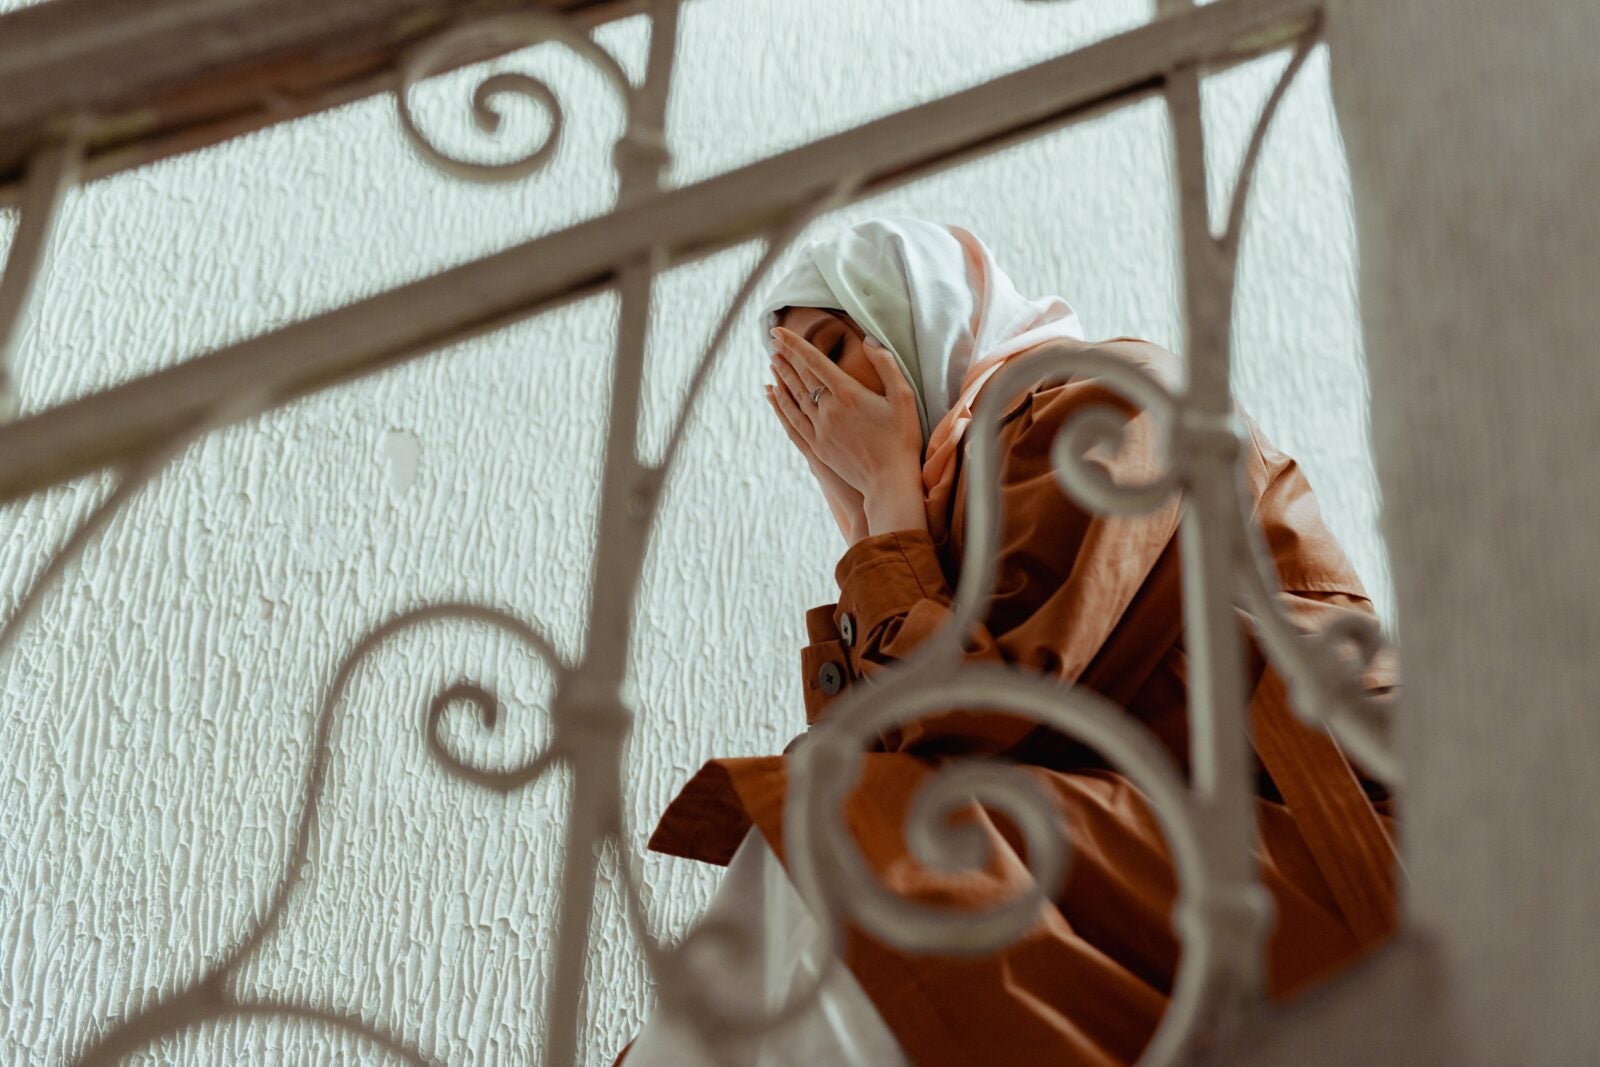 a Muslim woman crying on a flight of stairs